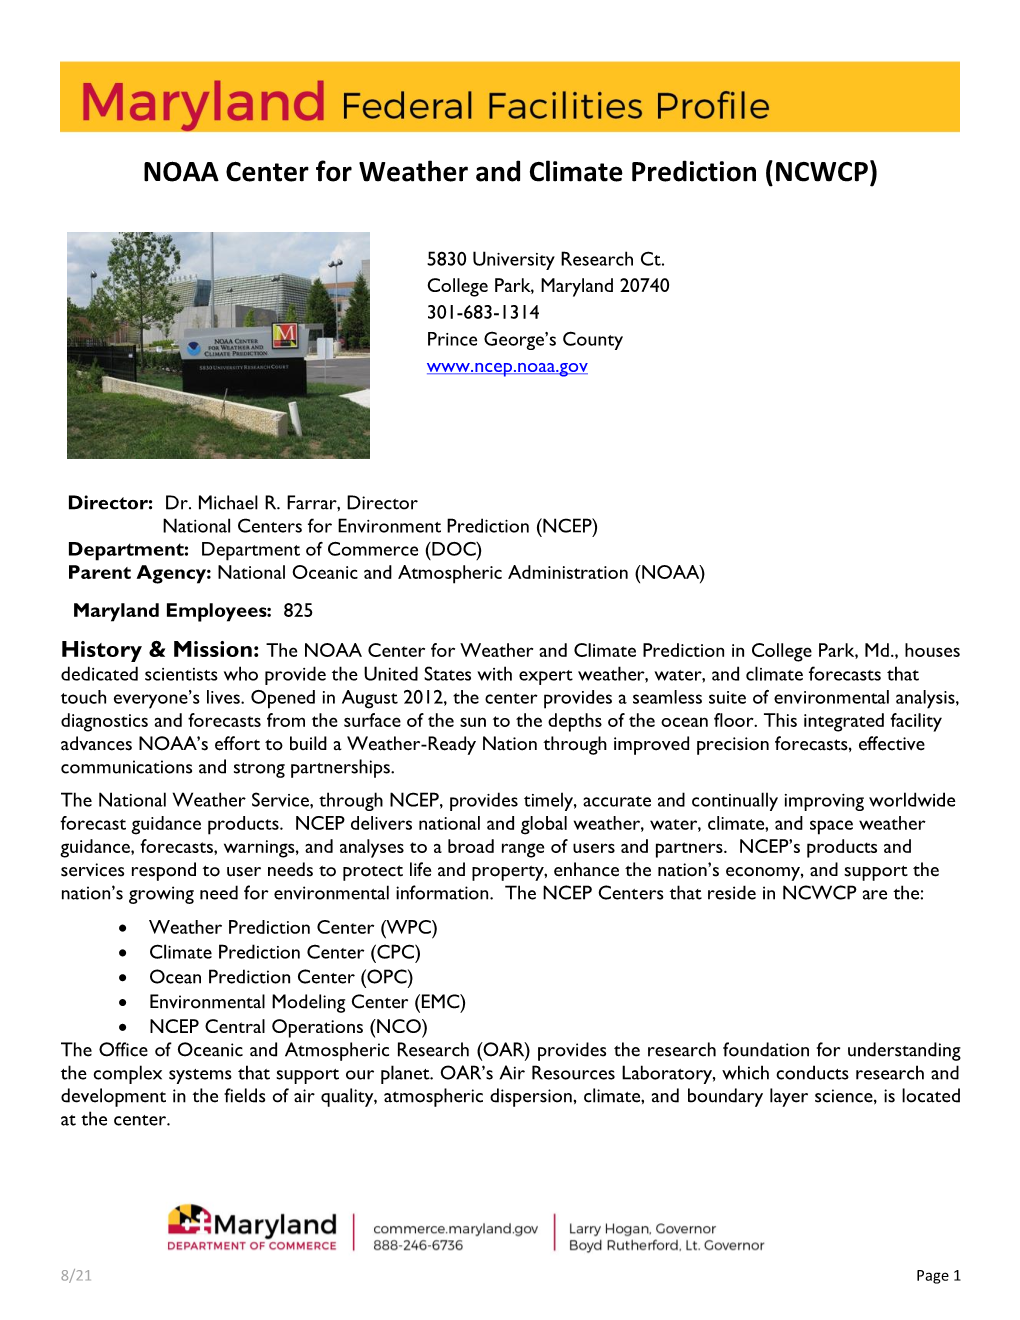 NOAA Center for Weather and Climate Prediction (NCWCP)